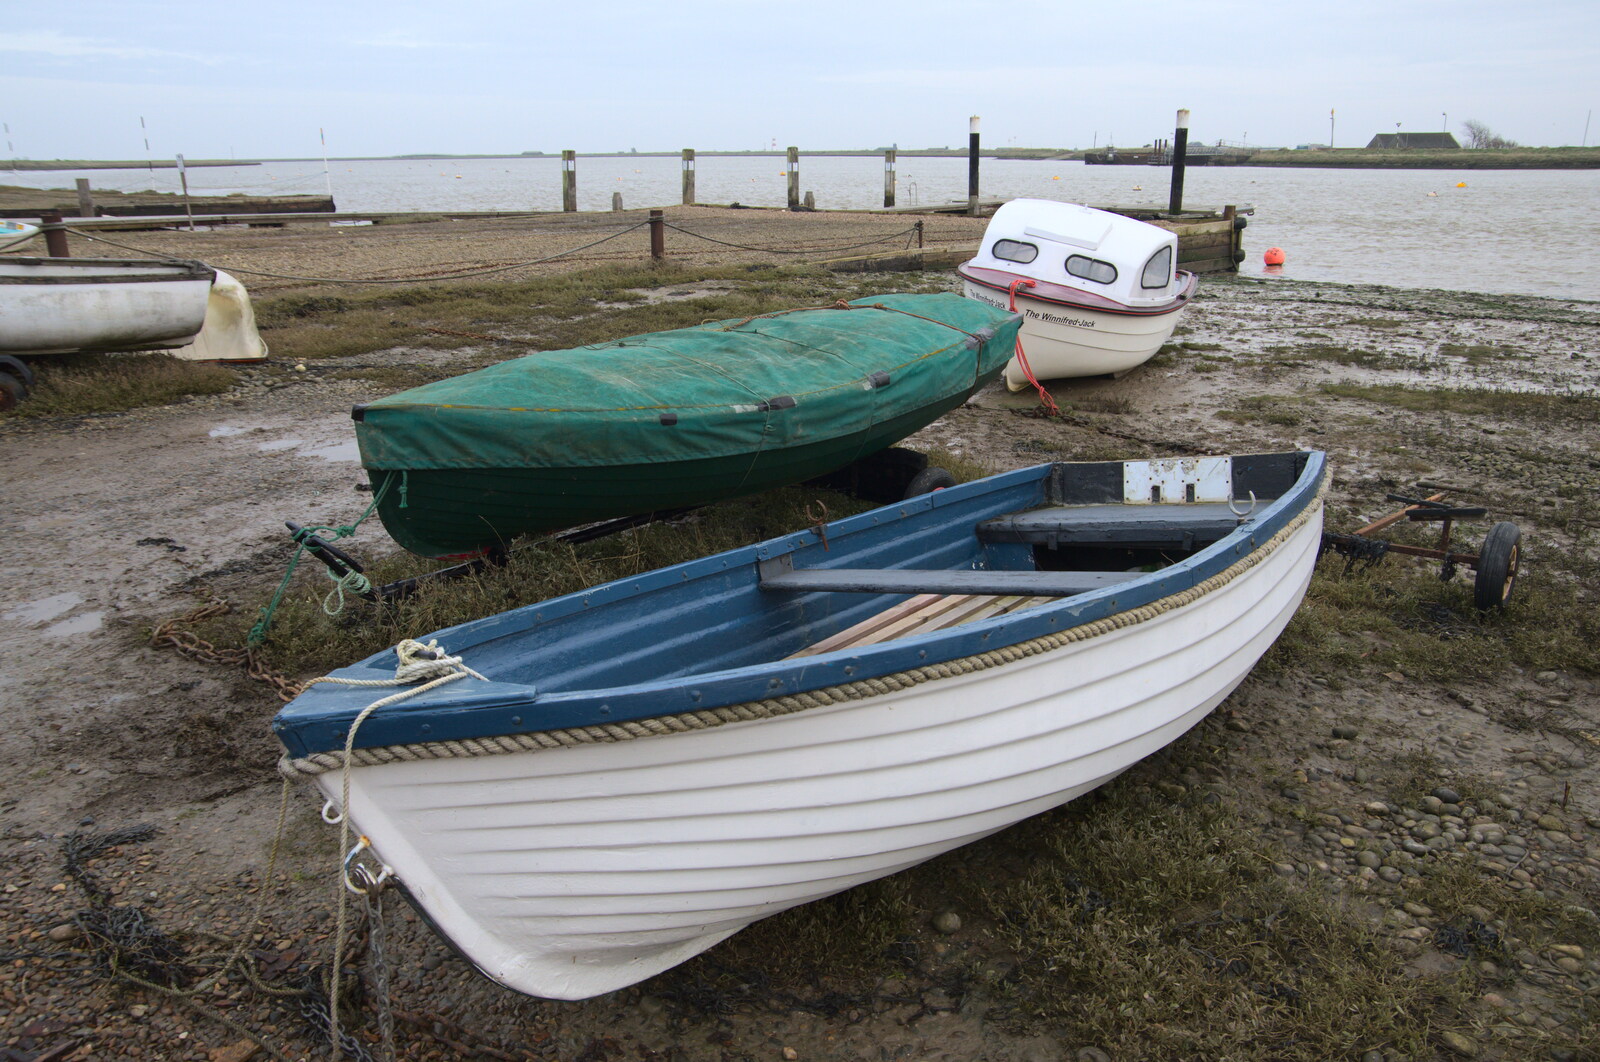 A Trip to Orford, Suffolk - 25th January 2020: Empty boats